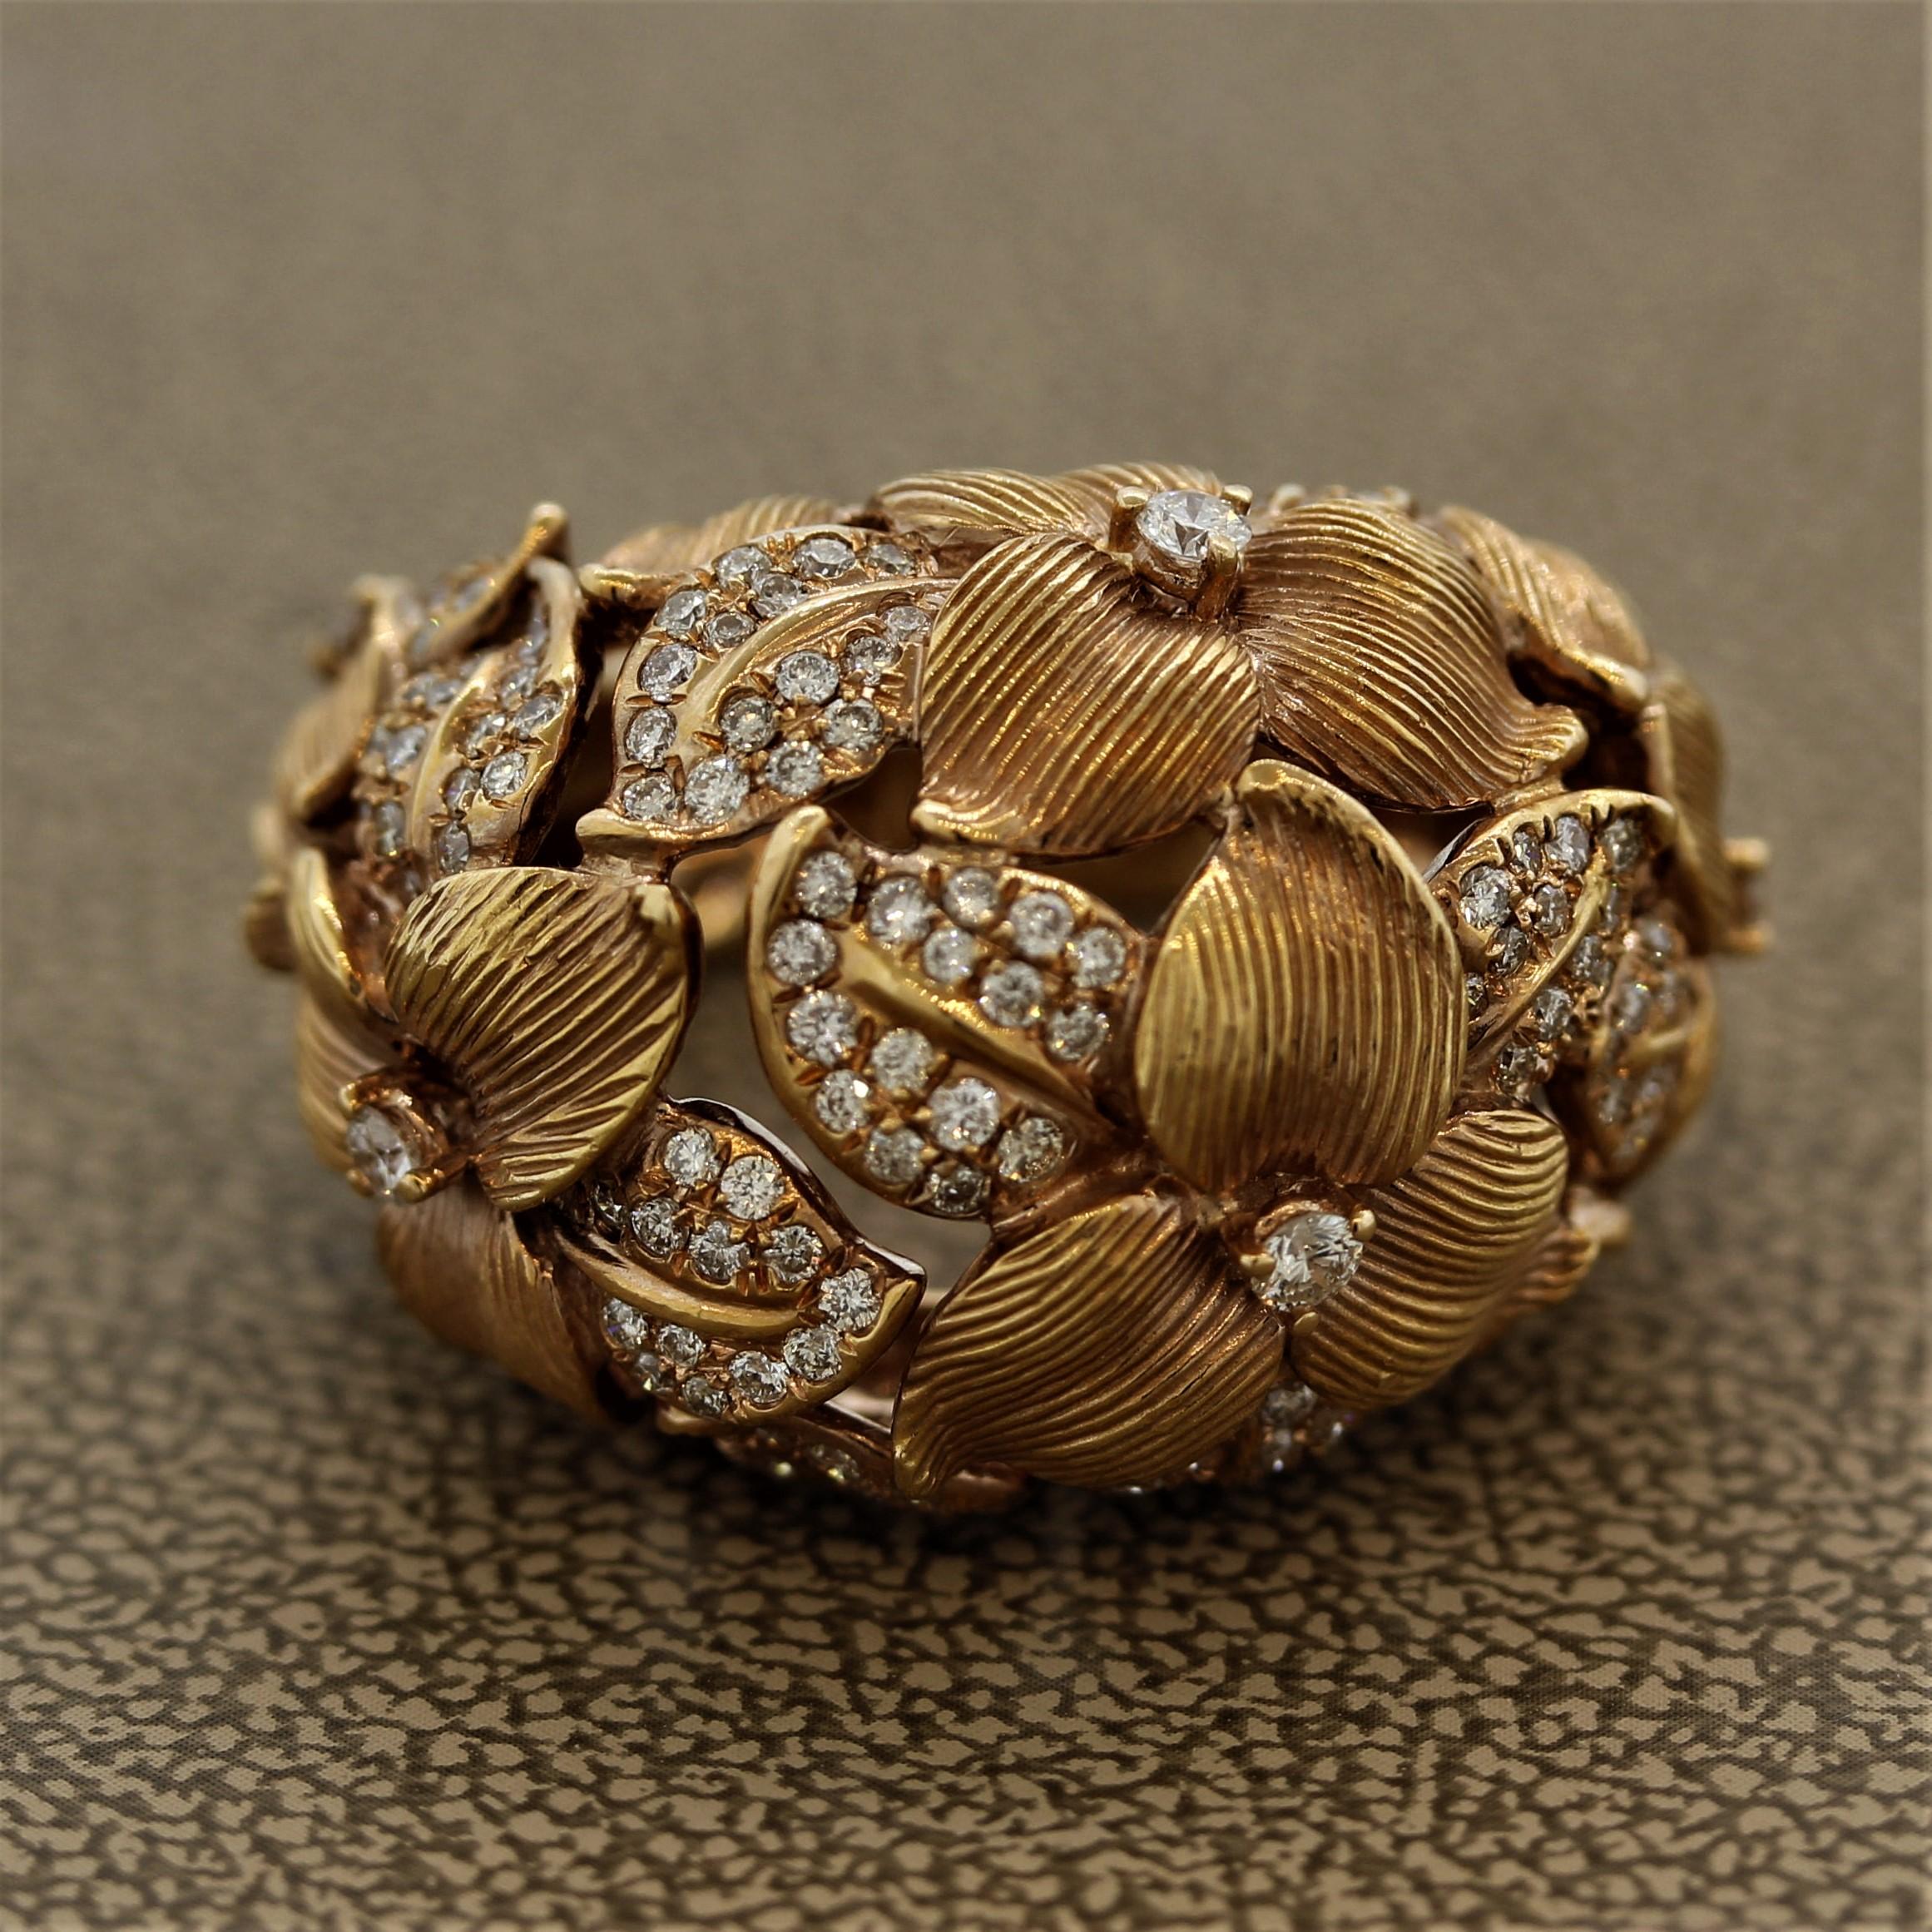 An exceptional ring handcrafted in 18k rose gold. It depicts a floral scene with diamond studded foliage. The piece features 1.17 carats of round brilliant cut diamonds which are set across hand carved foliage and flowers. The pedals of the flowers